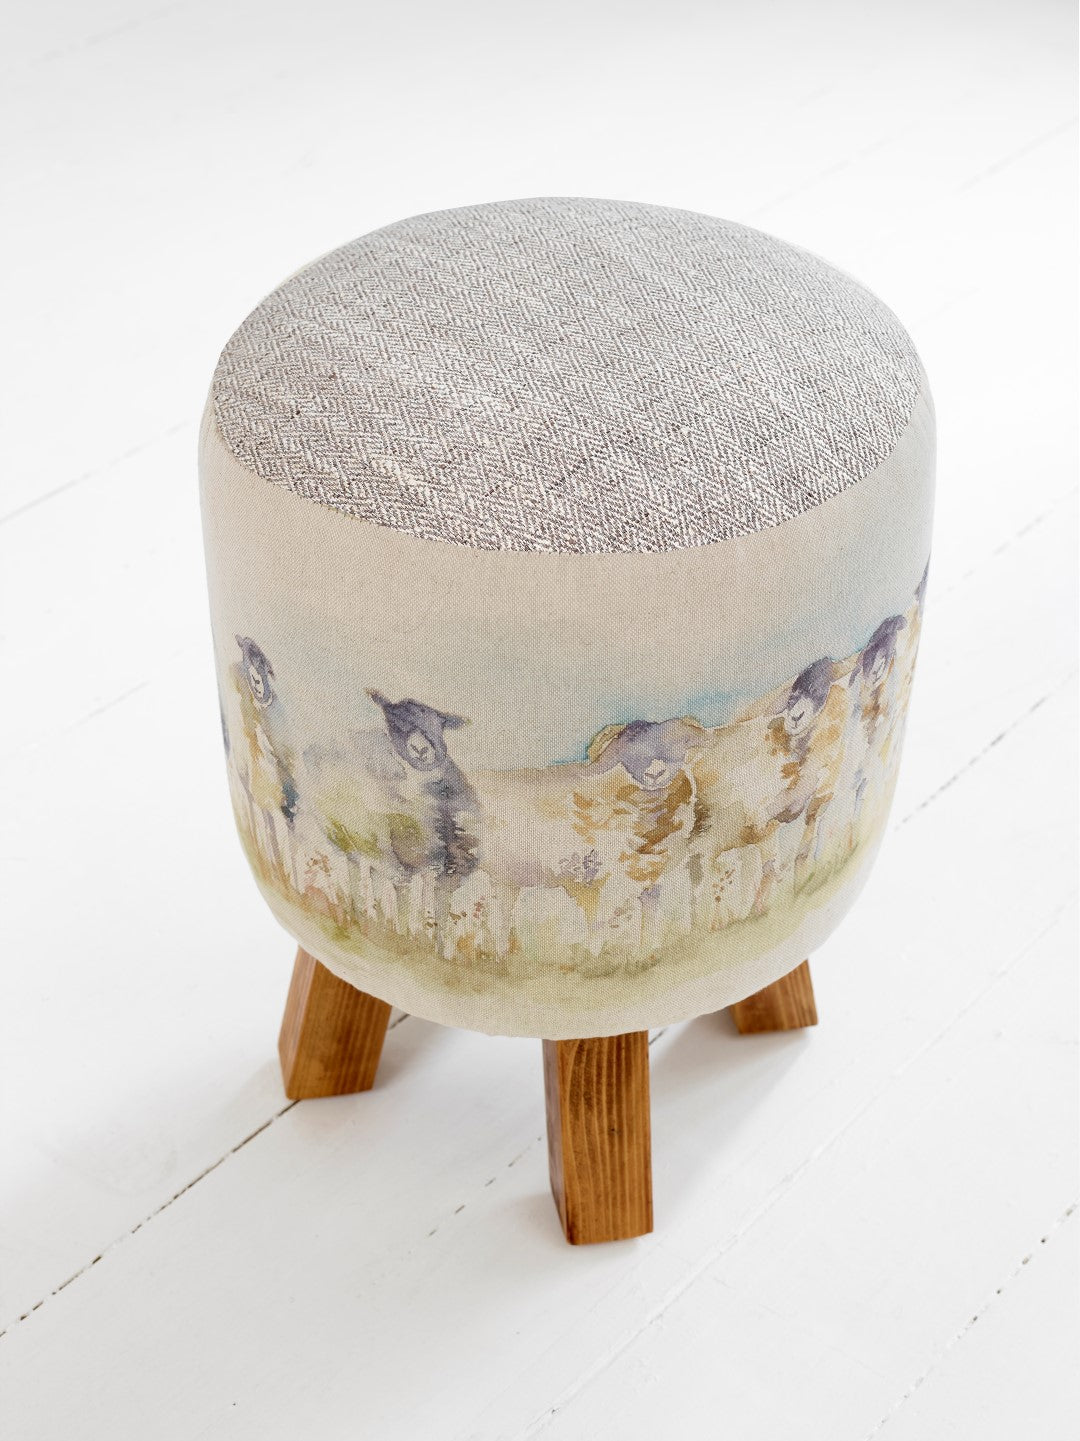 Come By Sheep Monty Stool Voyage Maison Foot Stool